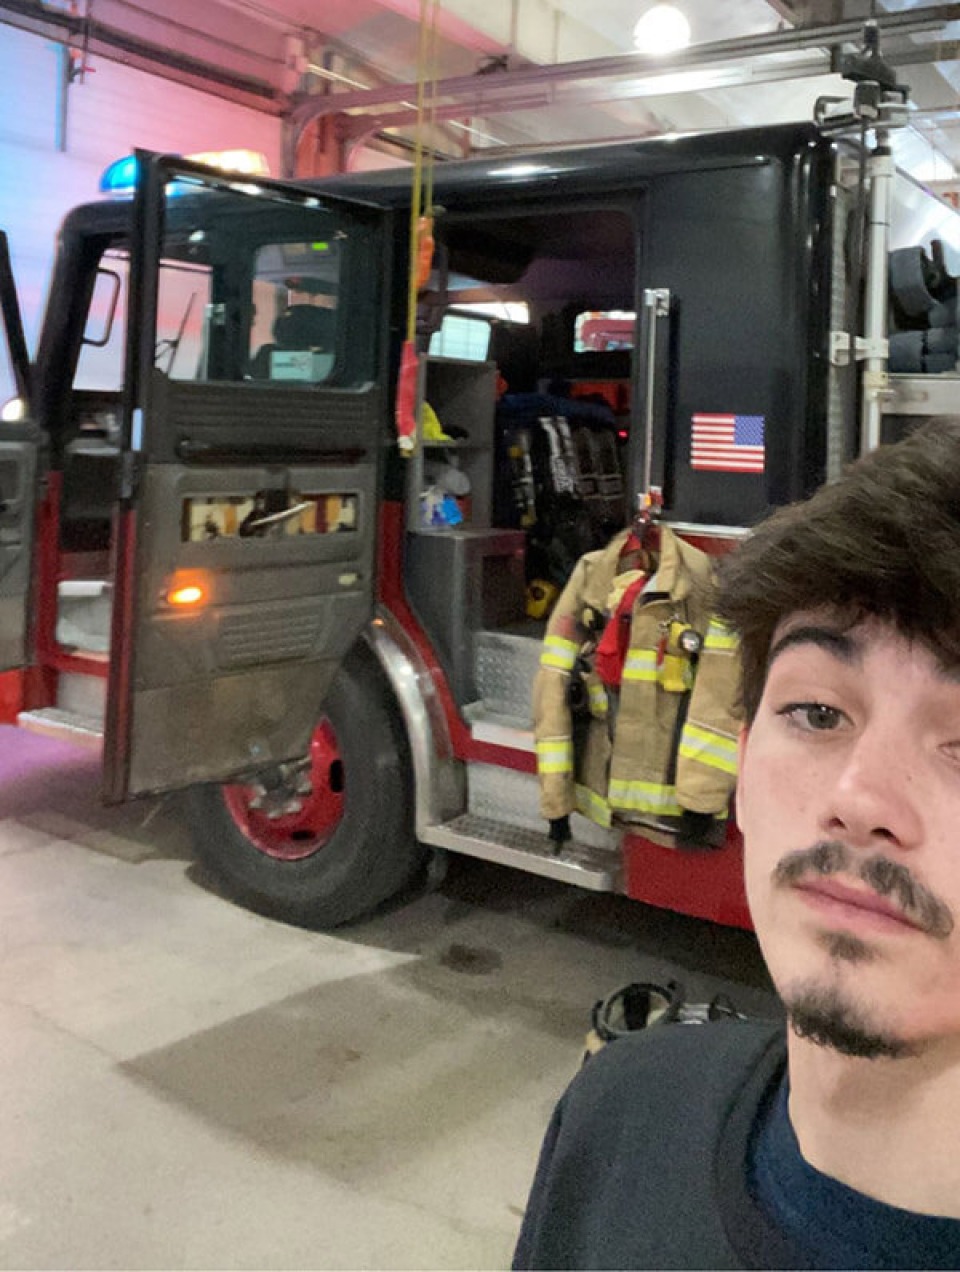 Cardinal High School student takes a selfie with a fire truck during a job shadowing opportunity.